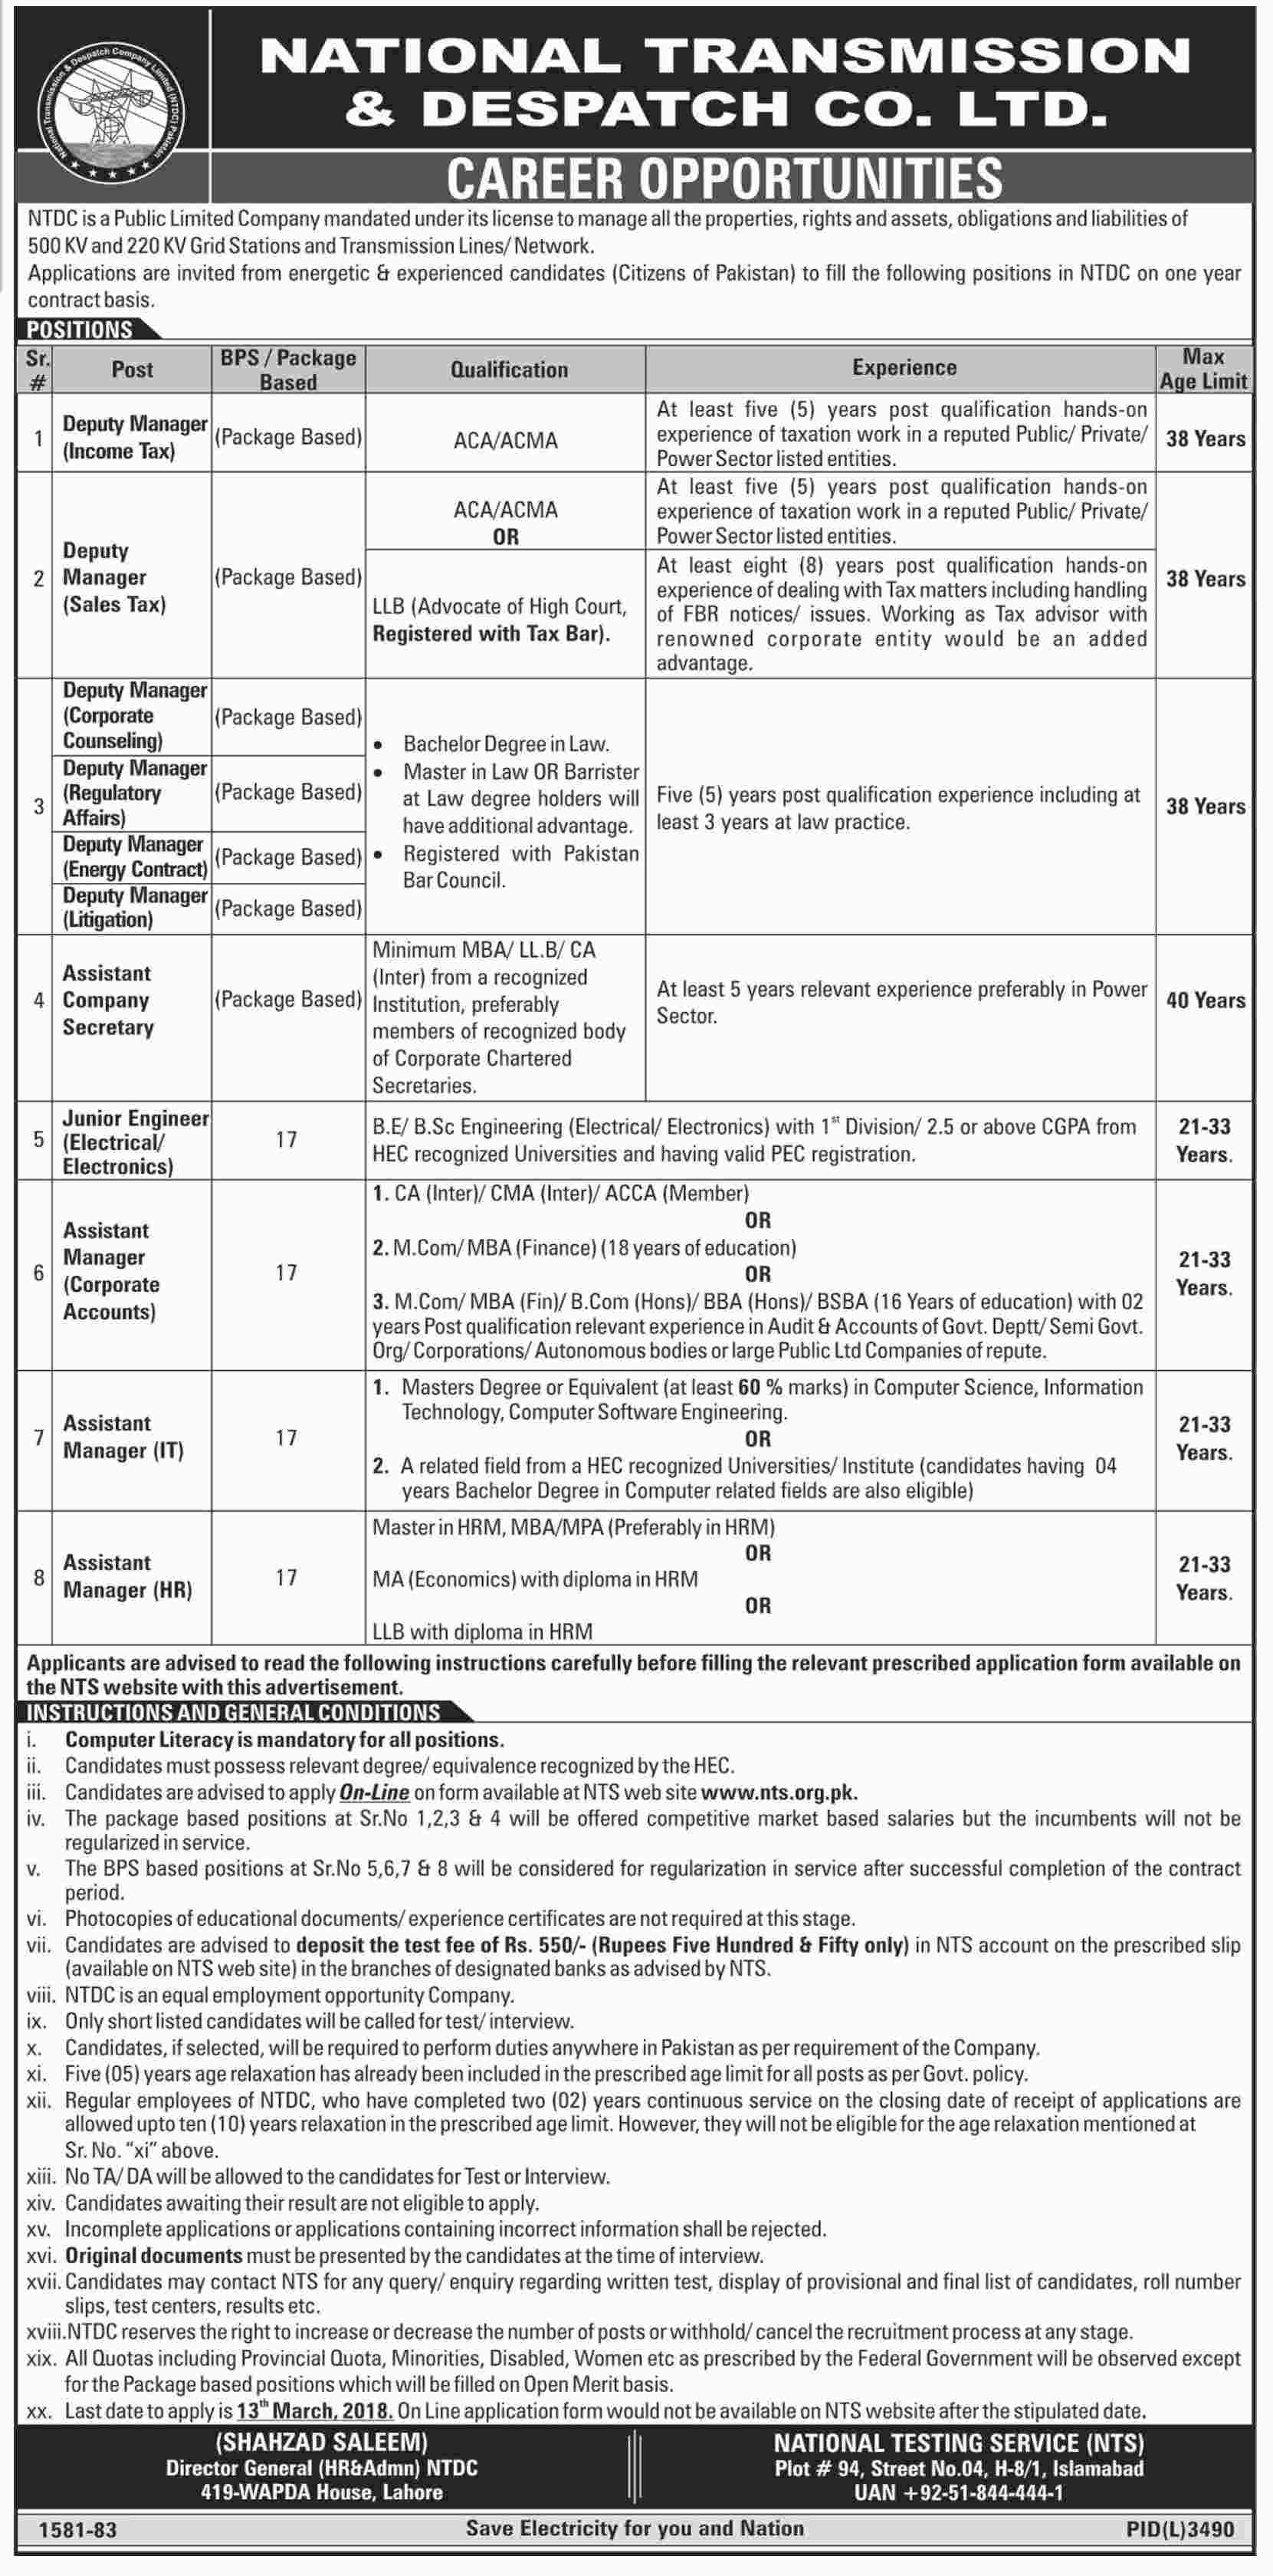 Jobs in National Transmission and Dispatch Company 25 Feb 2018